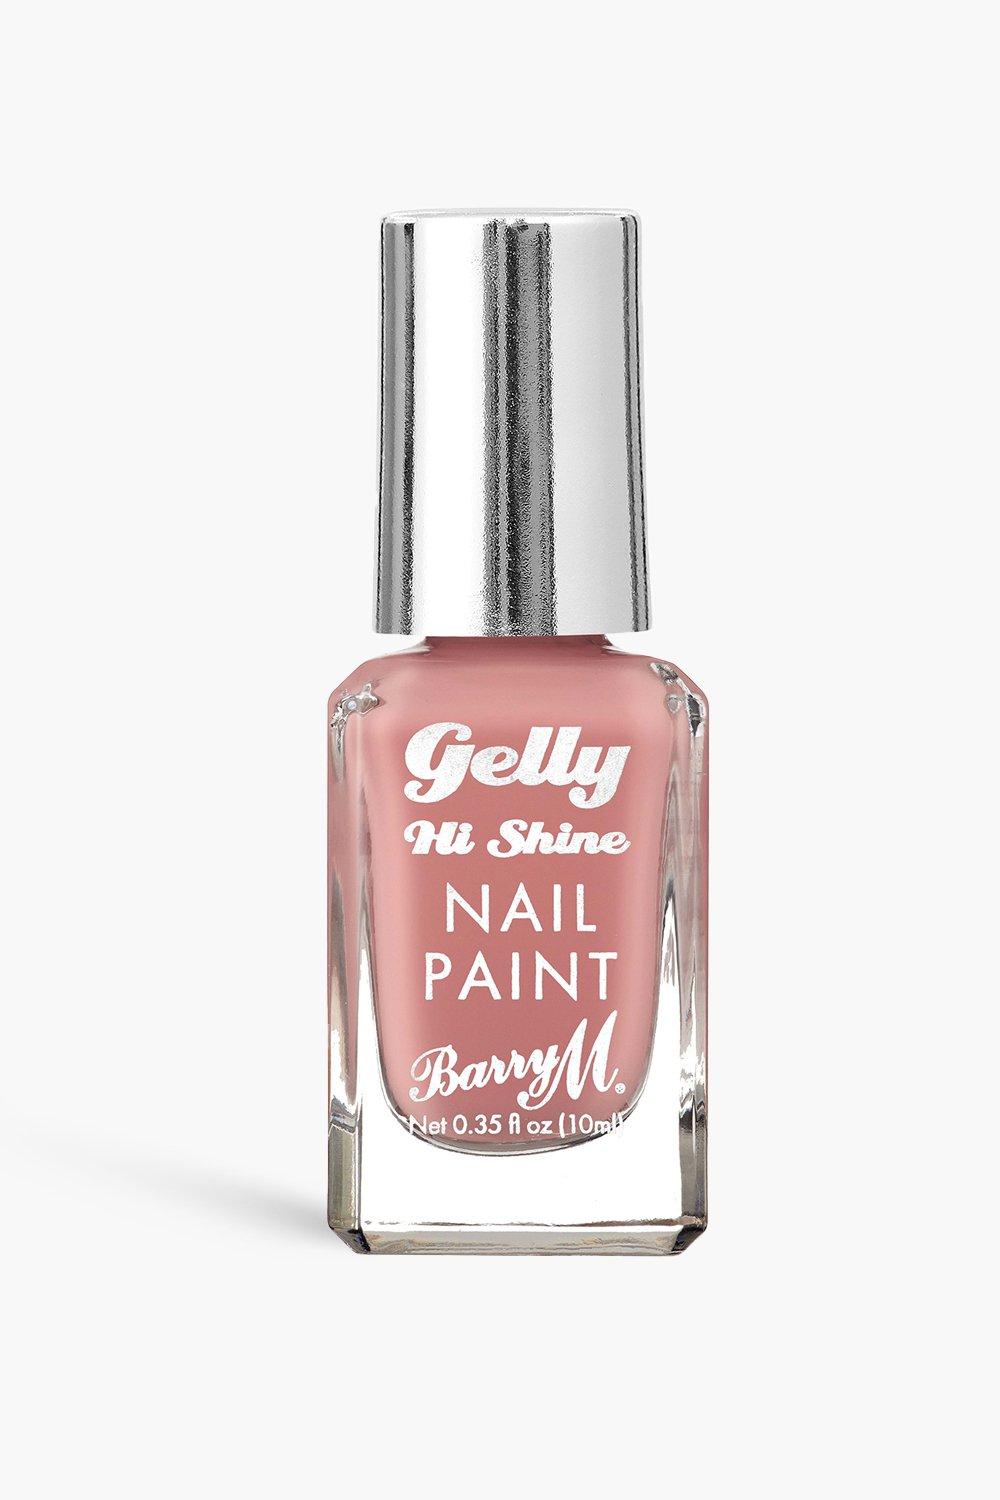 Barry M Gelly Nail Paint Honeysuckle, Coral